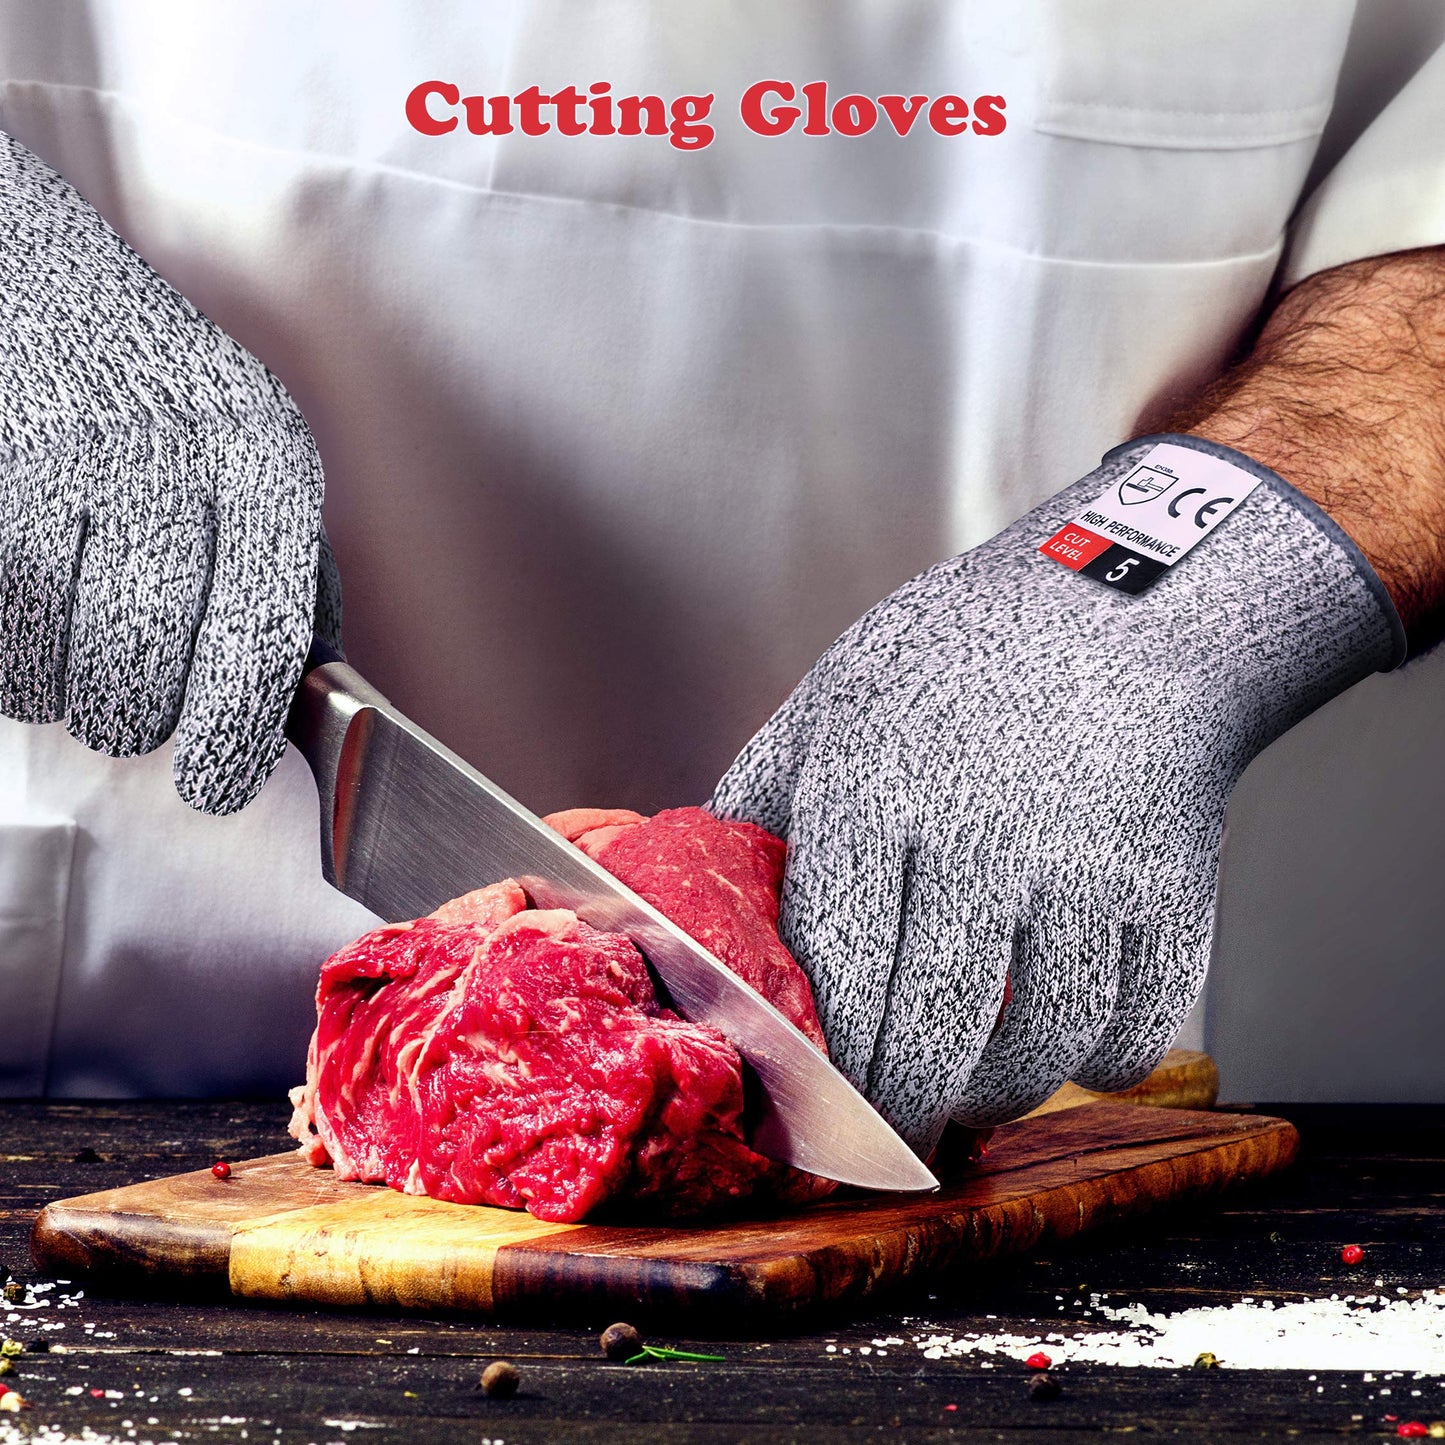 Apaffa Cut Resistant Gloves High Performance Level 5 Protection for Kitchen, Premium Durable Safety Anti Cutting Gloves for Mandolin Slicing, Meat Cutting,Wood Carving,1 Pair